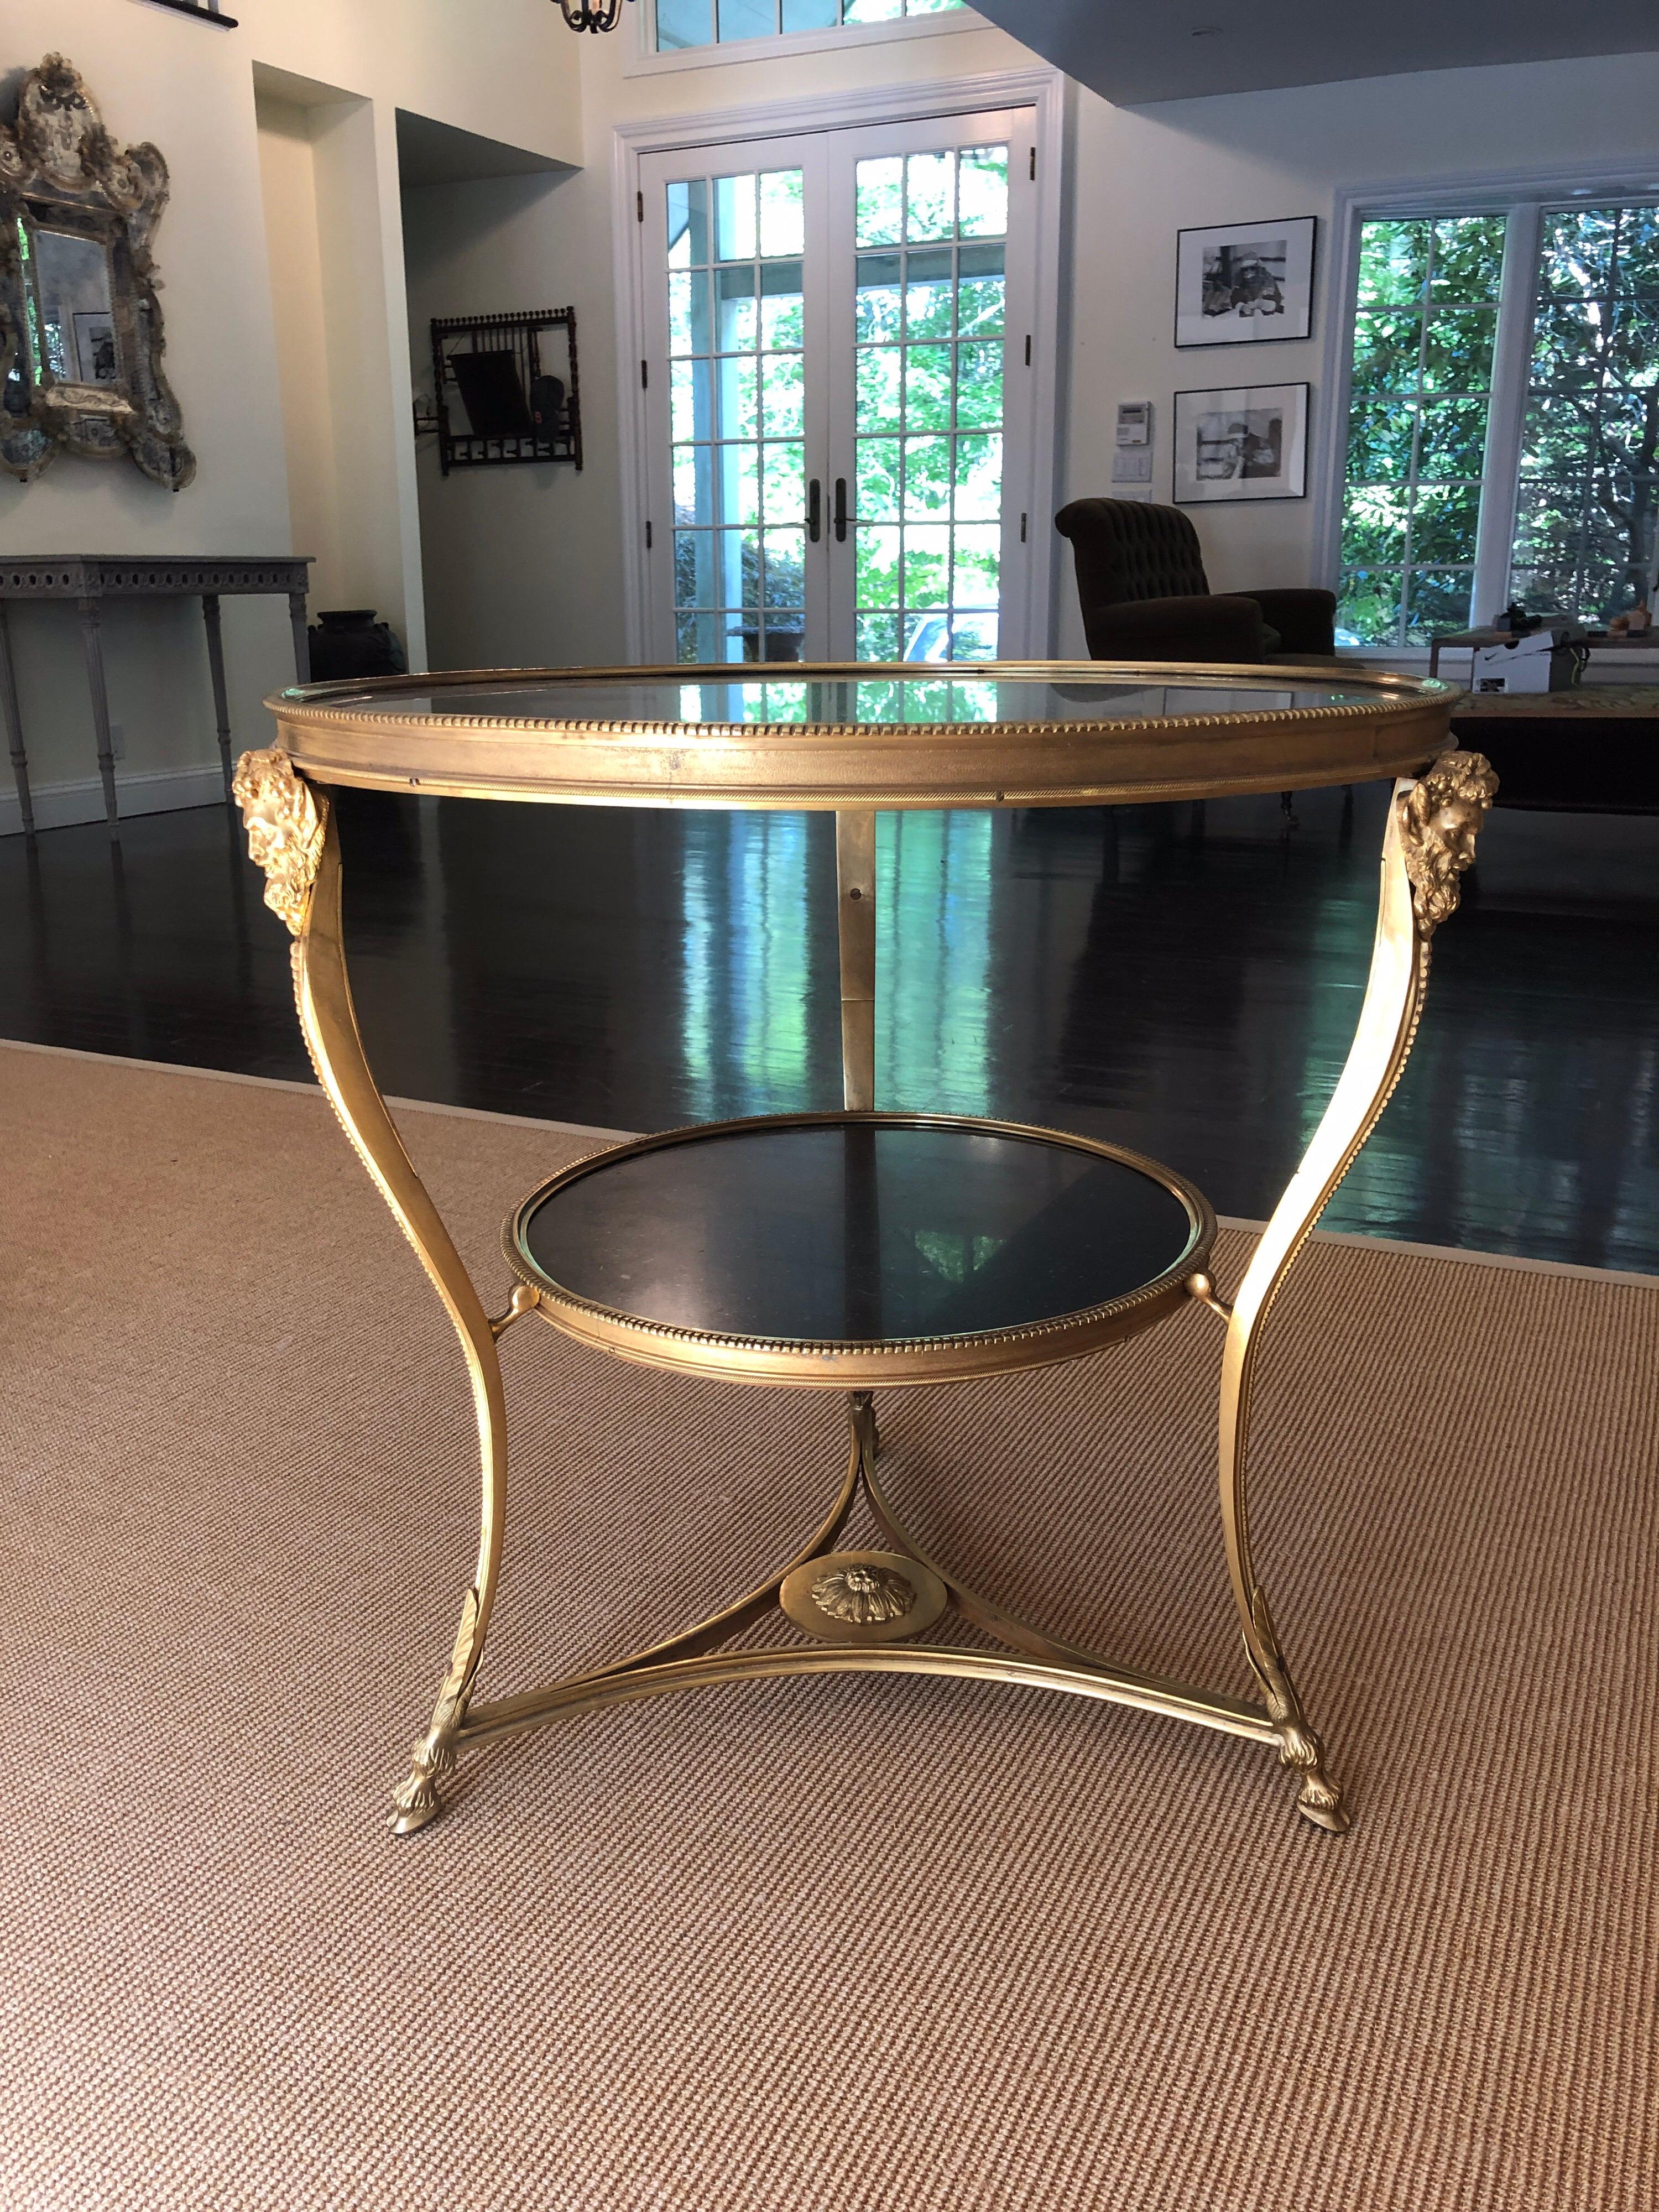 Directoire style gilt bronze gueridon table with dark marble top. Two tiers with dark marble tops, gilt bronze Bacchus heads, ram hoof feet and central medallion on lower structure. This is in excellent condition.